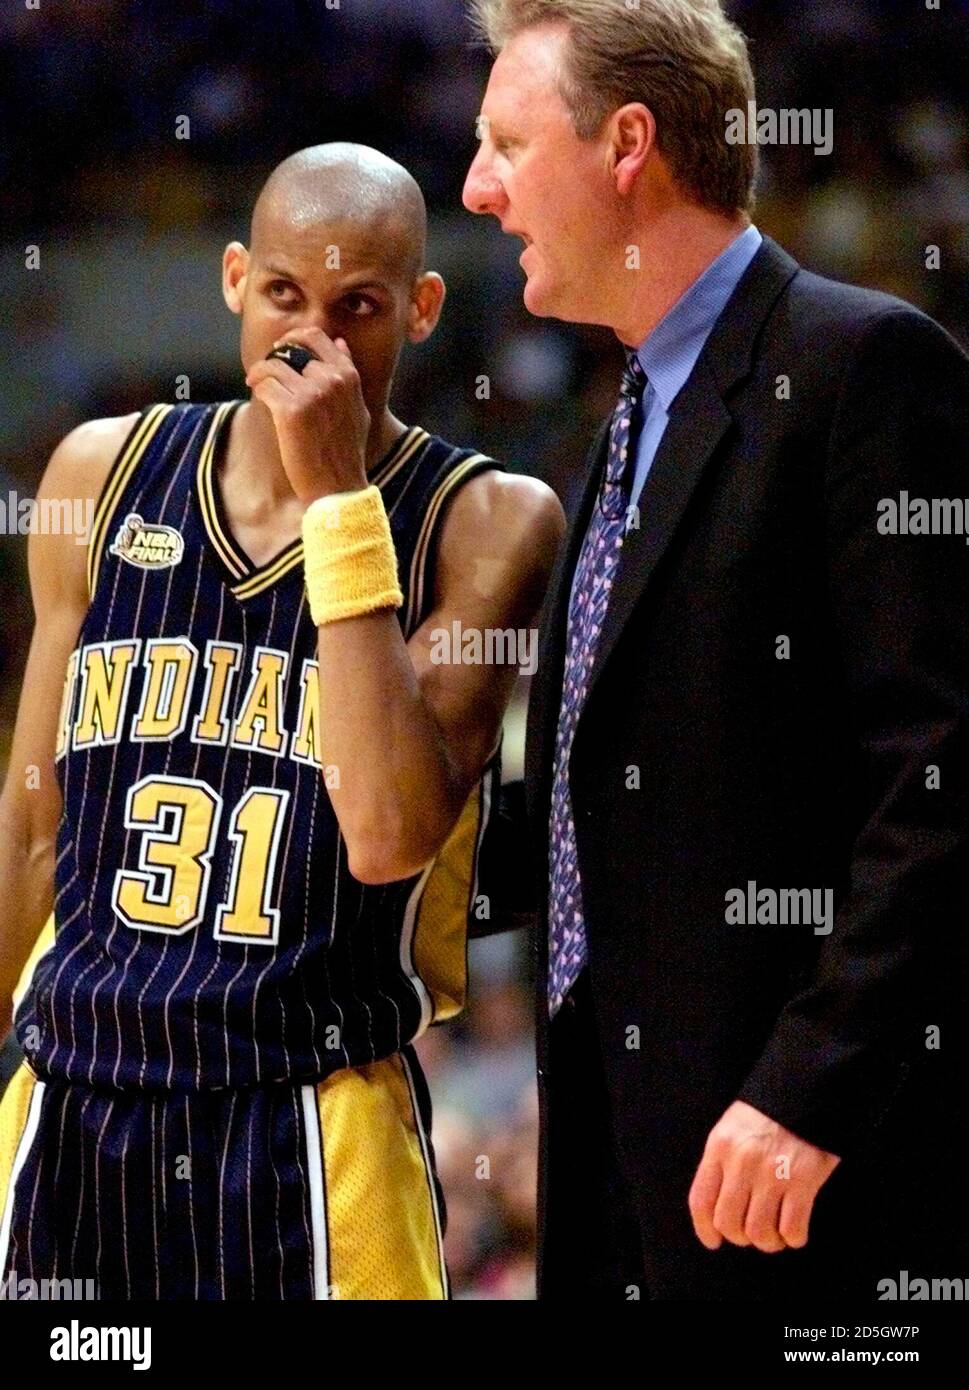 Indiana Pacers' coach Larry Bird talks with Reggie Miller during the final  minute of game 2 of the NBA Finals, in Los Angeles June 9. The Lakers took  a 2-0 lead in